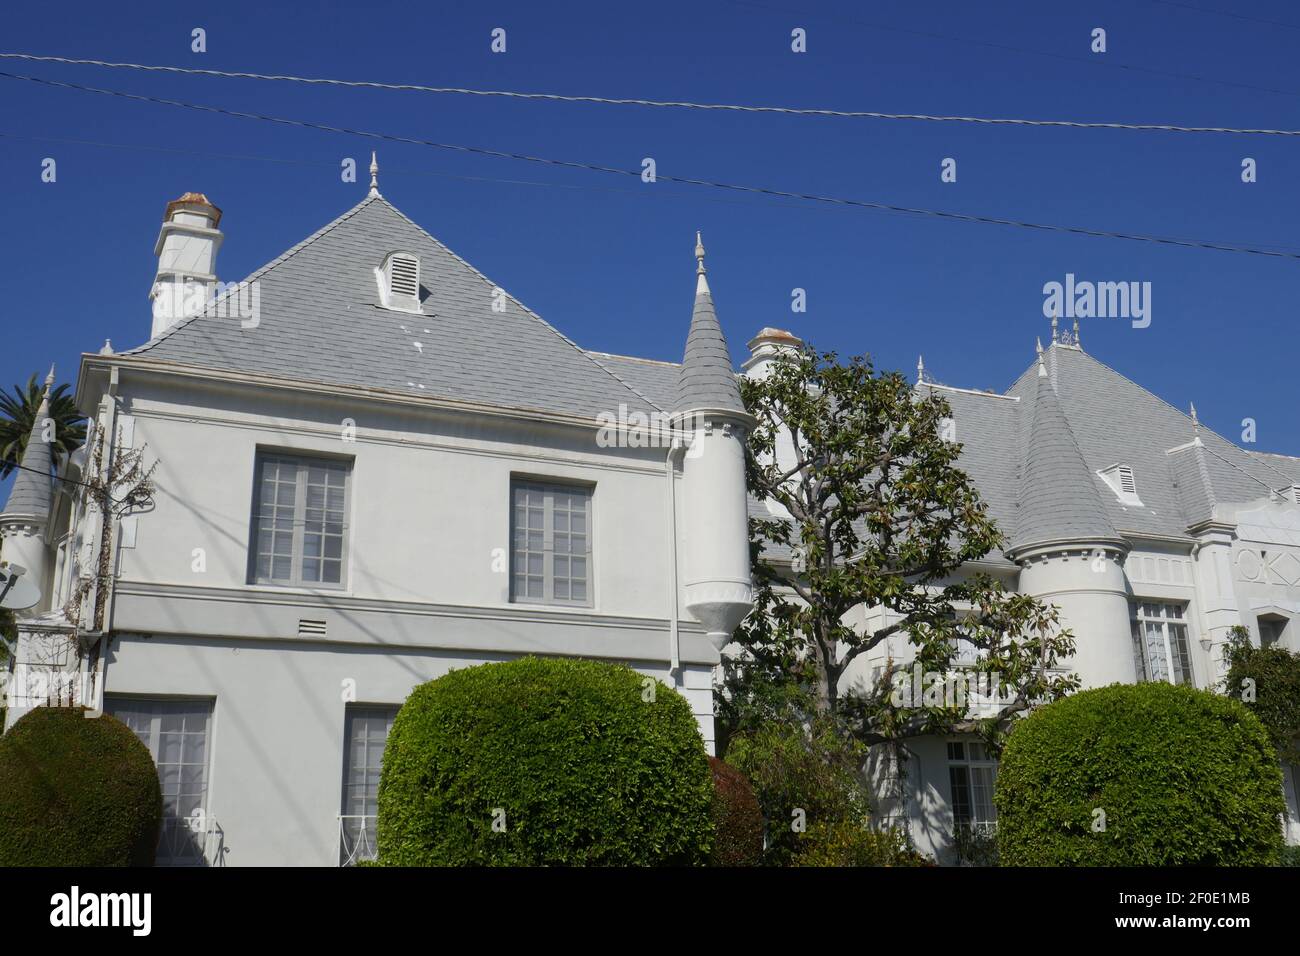 Los Angeles, California, USA 7th March 2021 A general view of atmosphere of Singer Madonna and actor Sean Penn's former home/residence on March 7, 2021 in Los Angeles, California, USA. Photo by Barry King/Alamy Stock Photo Stock Photo